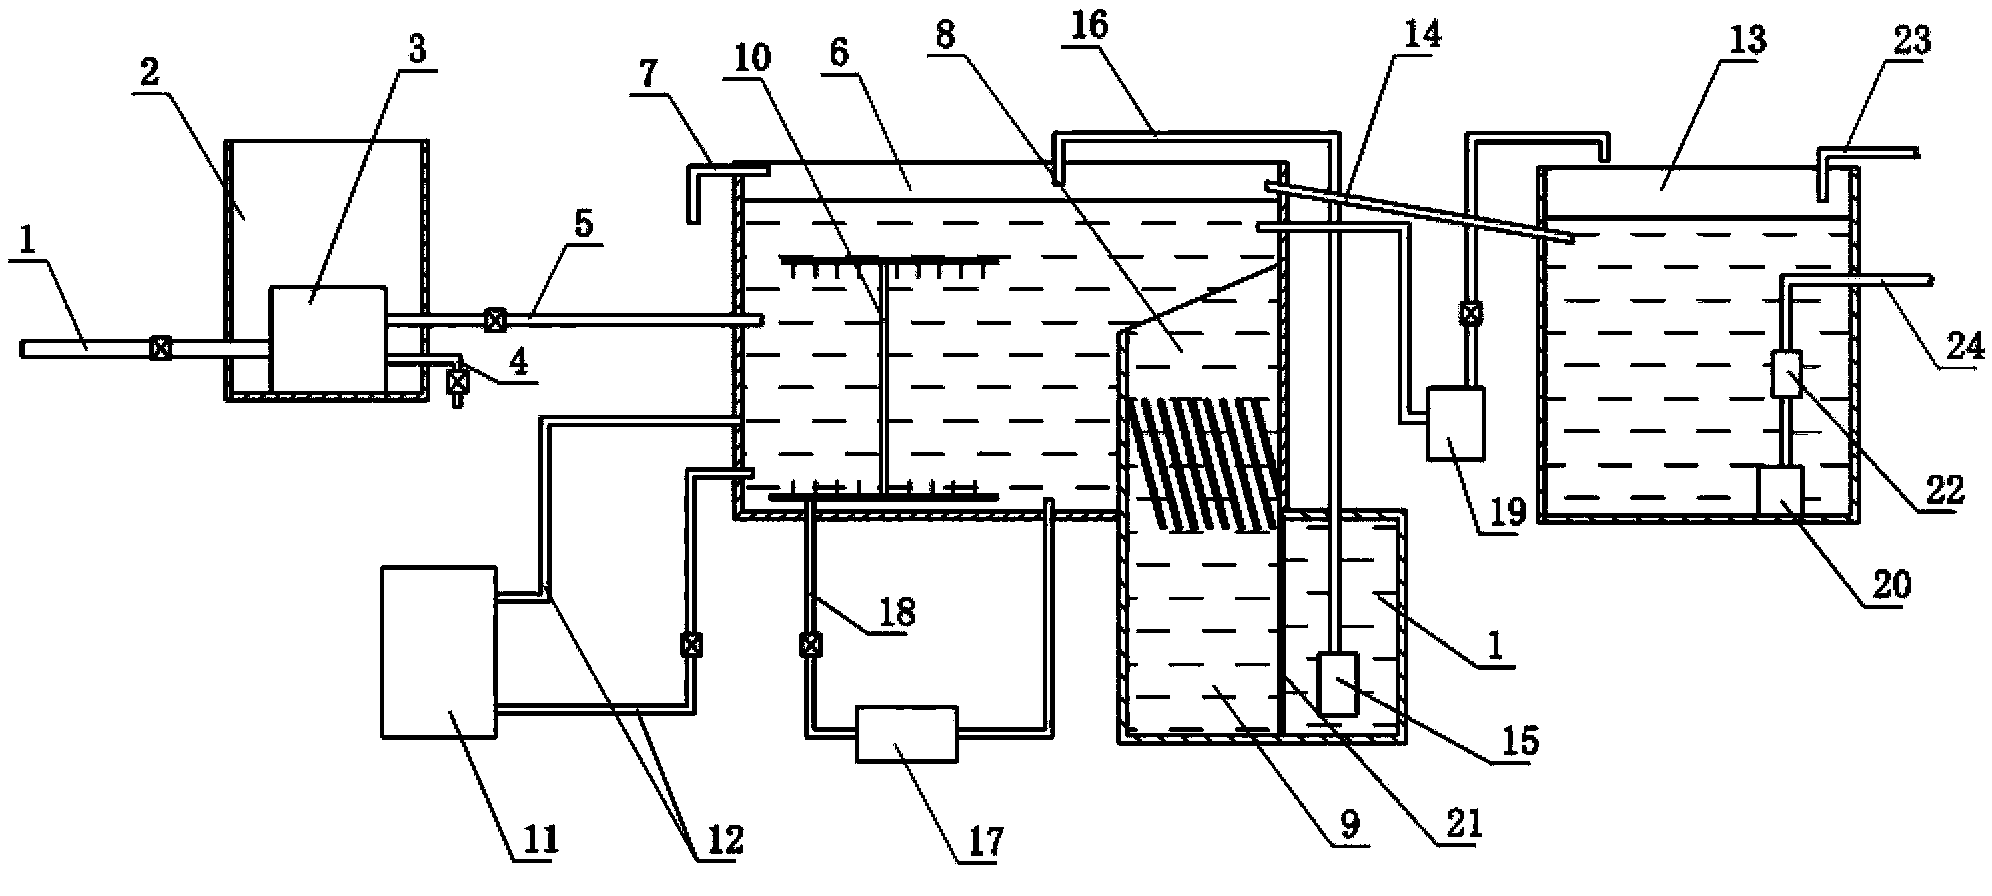 Rainwater collecting and processing system